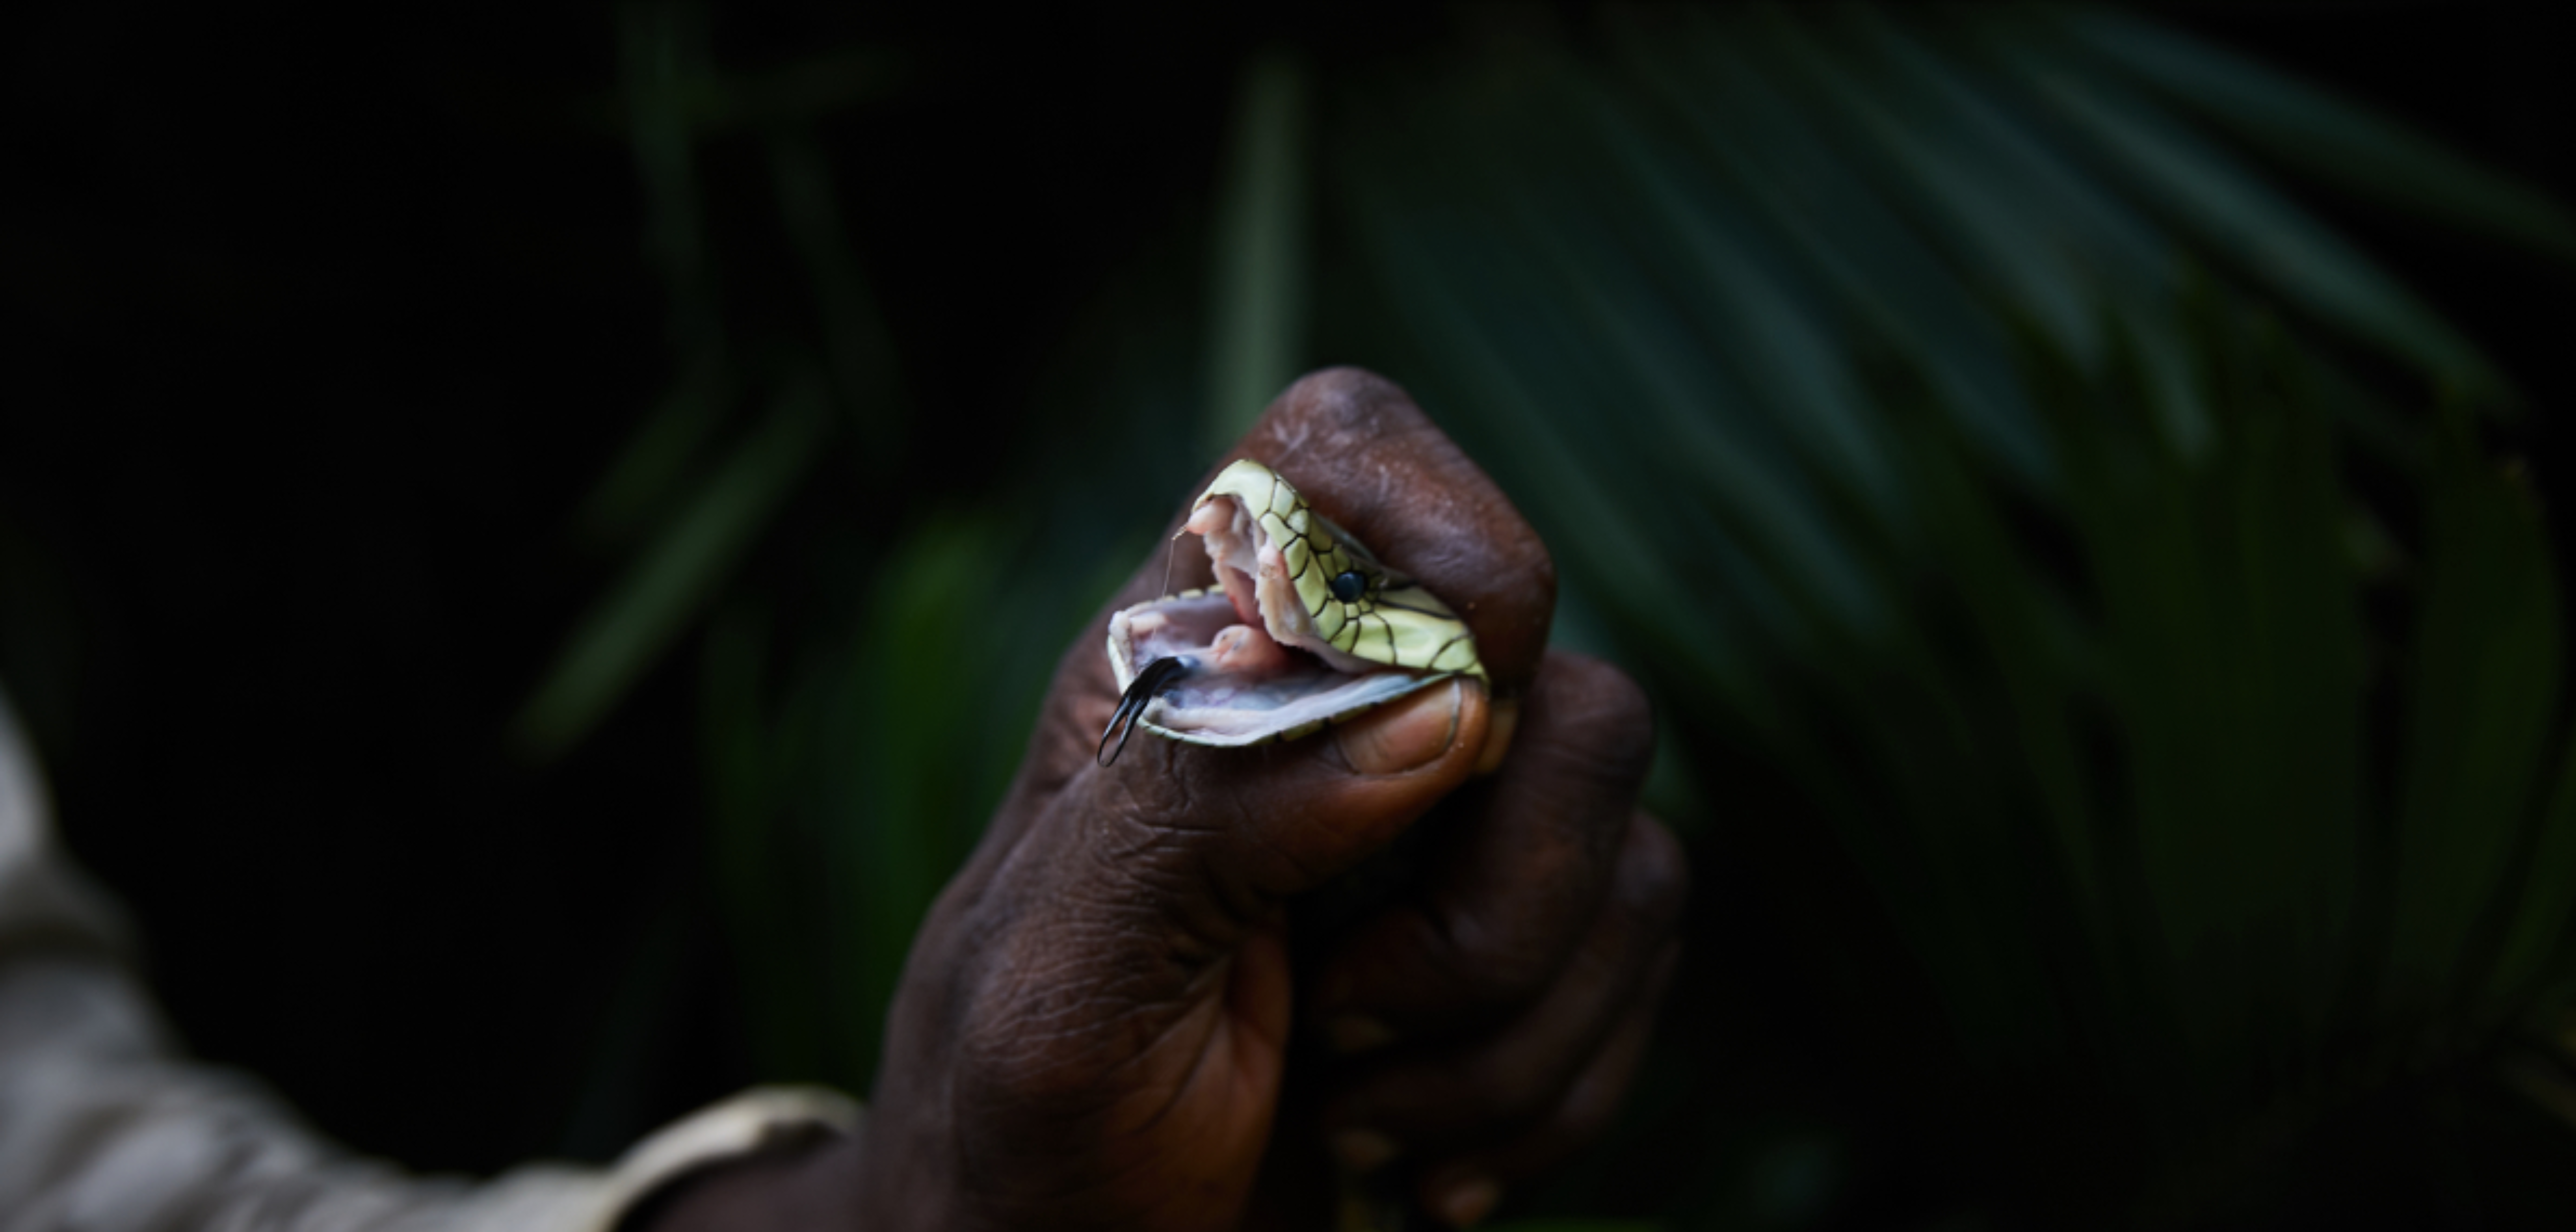 A venomous snake in the DRC. Image by Hugh Kinsella Cunningham. Democratic Republic of the Congo, 2019.